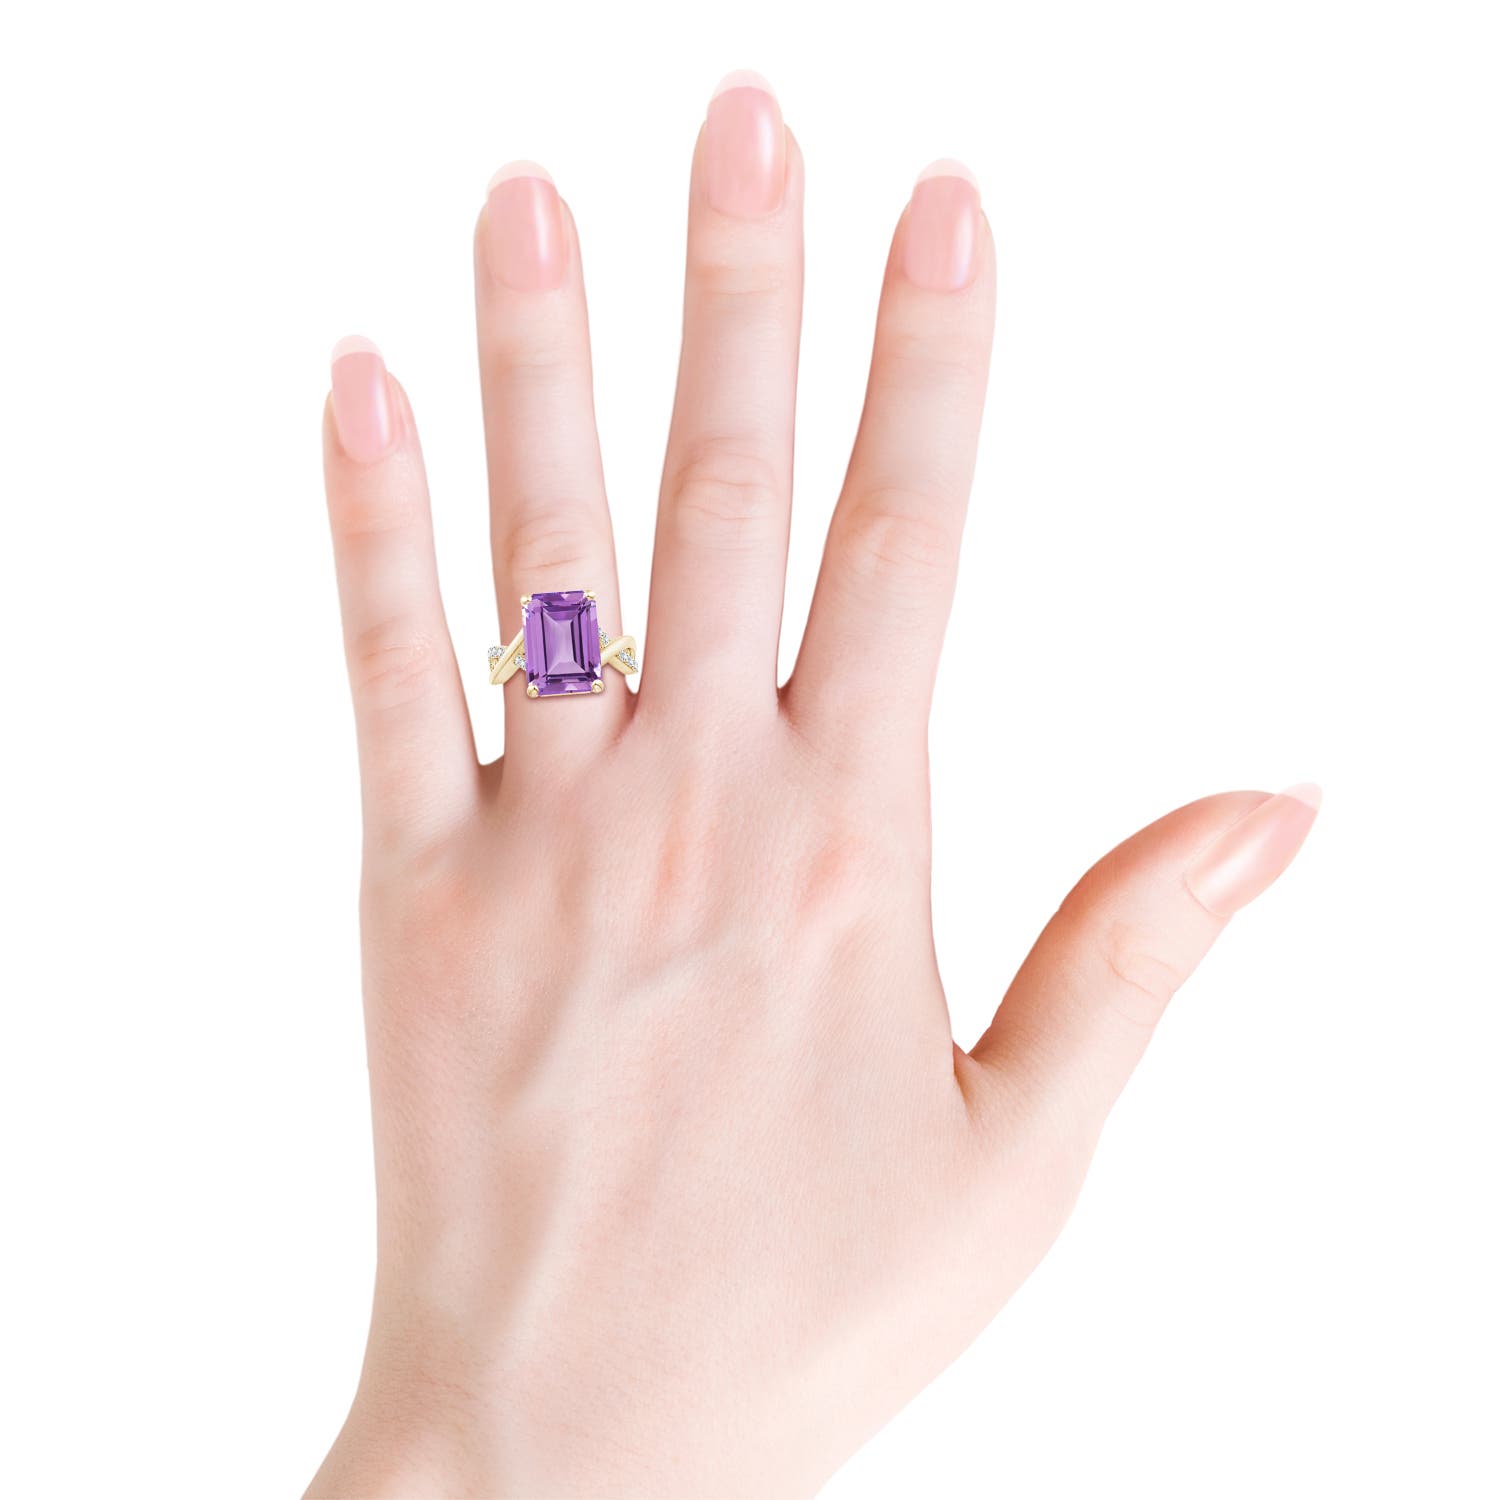 A - Amethyst / 6.7 CT / 14 KT Yellow Gold